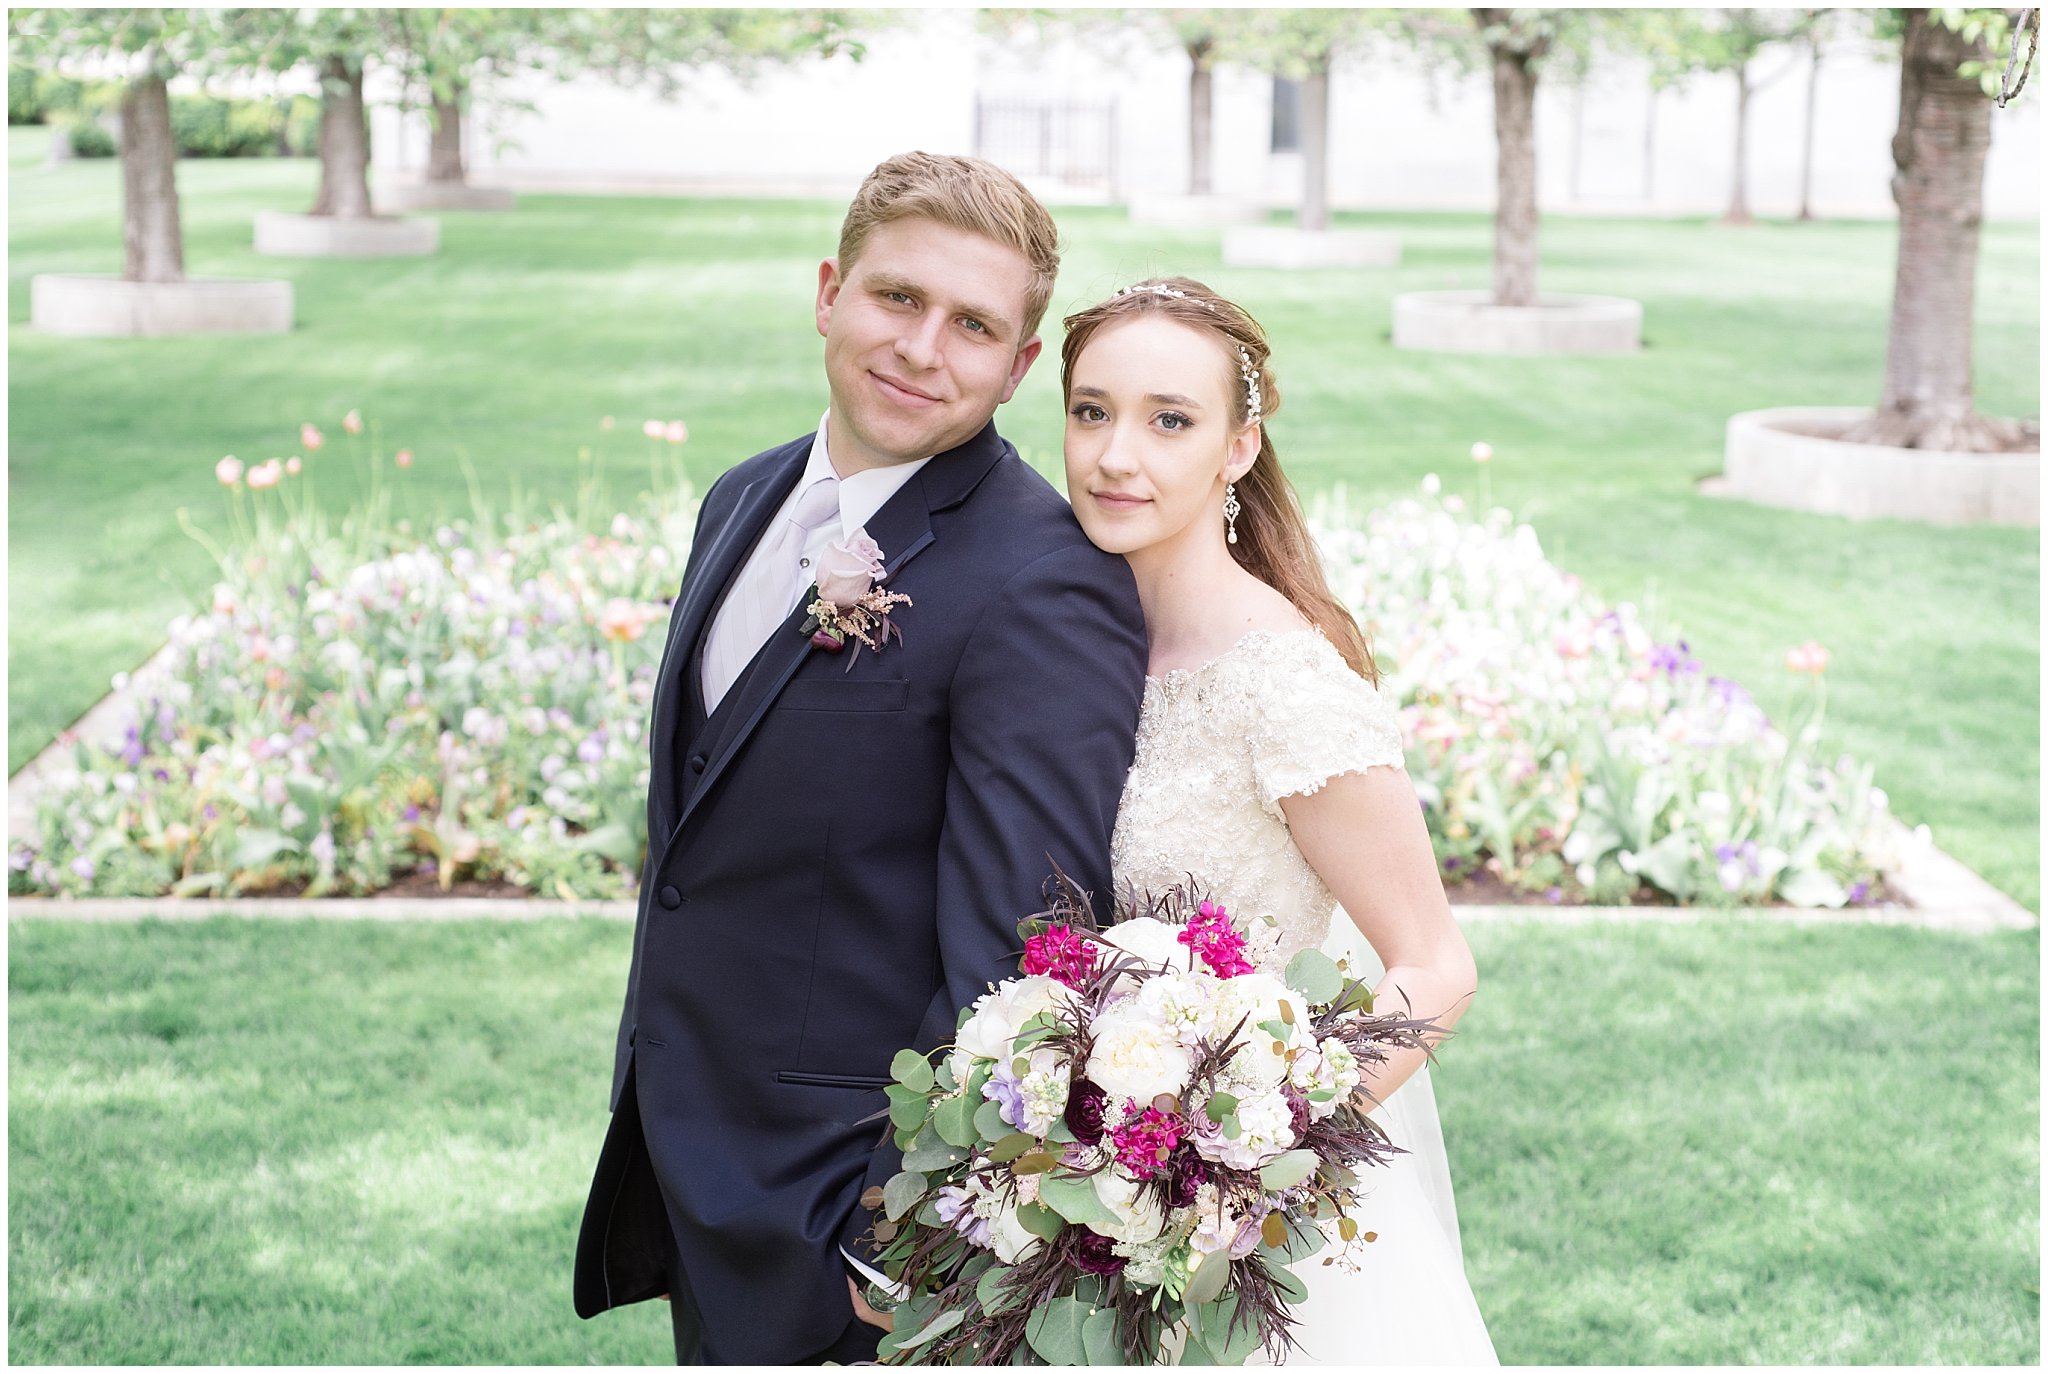 Bride and groom at the Salt Lake Temple | Modern, gorgeous bouquet wedding flowers | Jessie and Dallin Photography